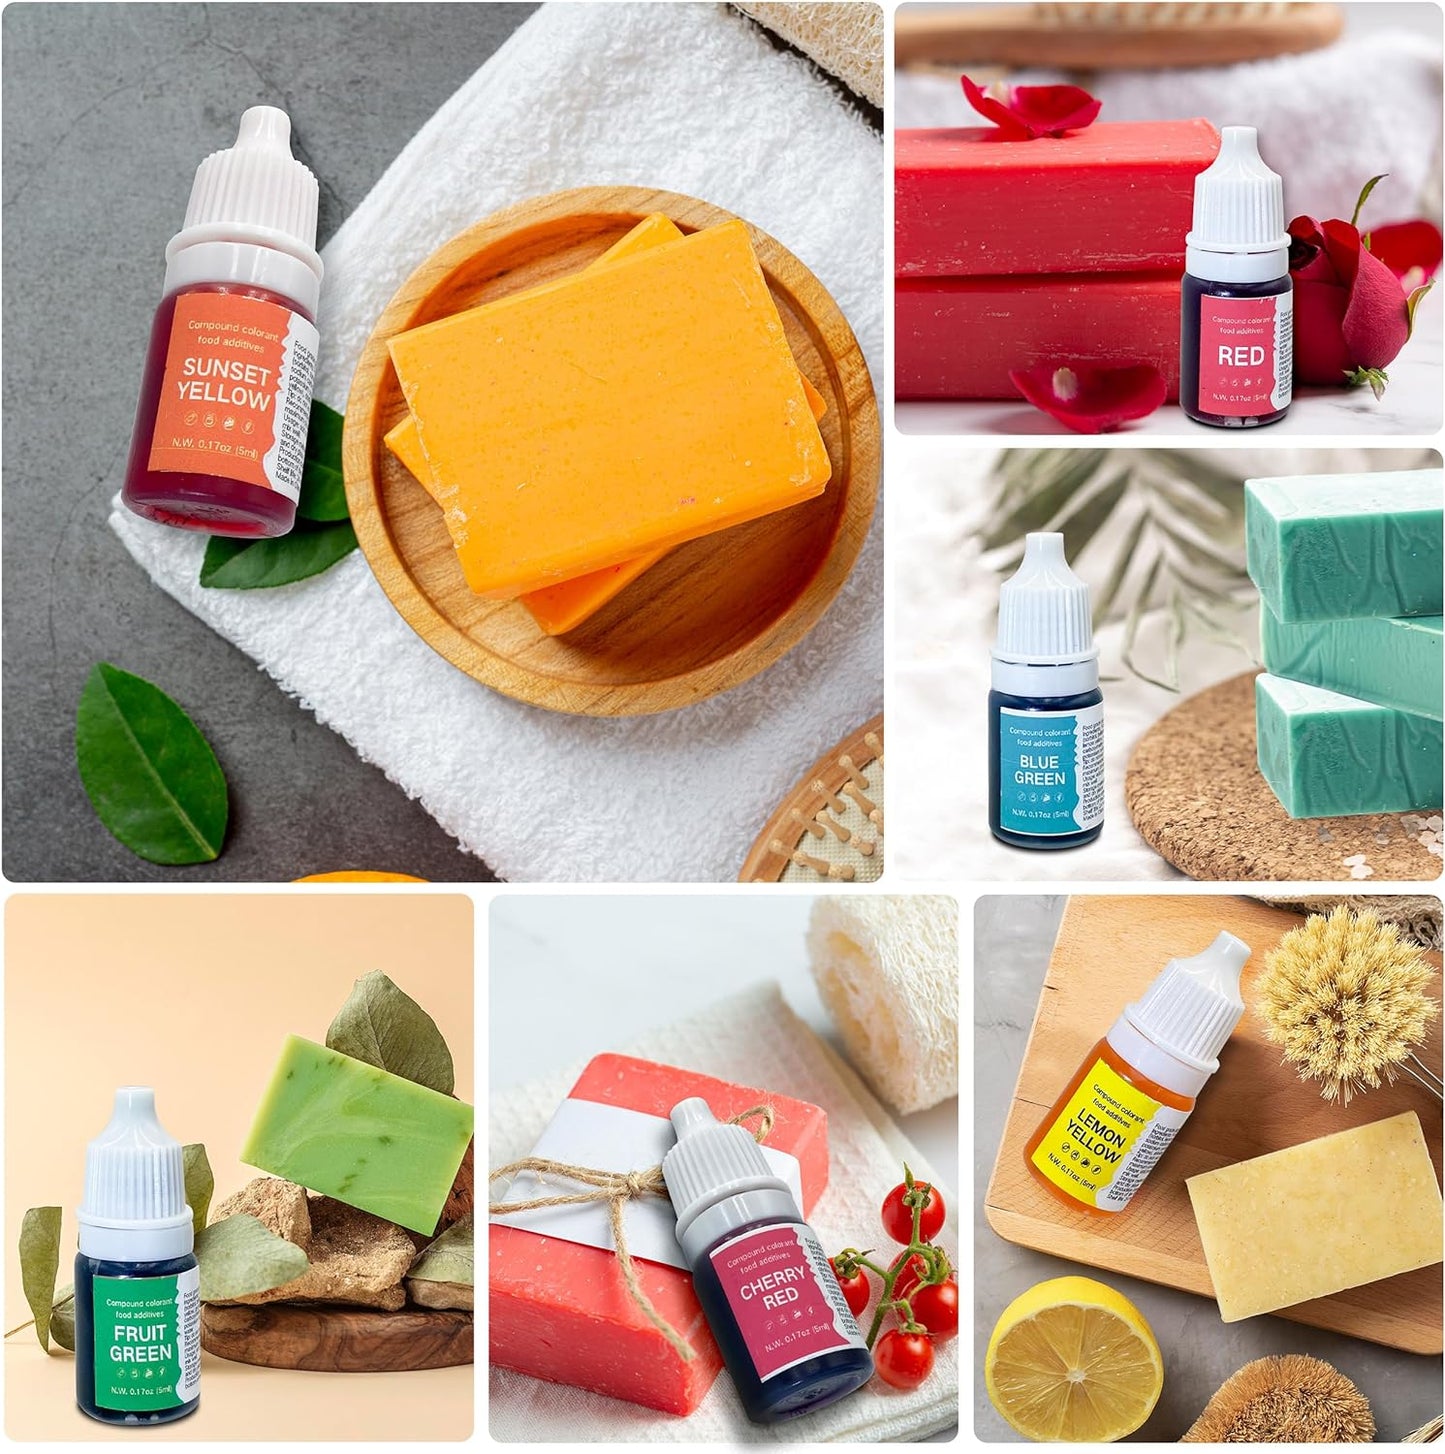 DIY Soap Making Kit with Melt & Pour Base, Cutting Box, Molds, Fragrances, Flowers Silicone Molds - for Adults & Kids Craft